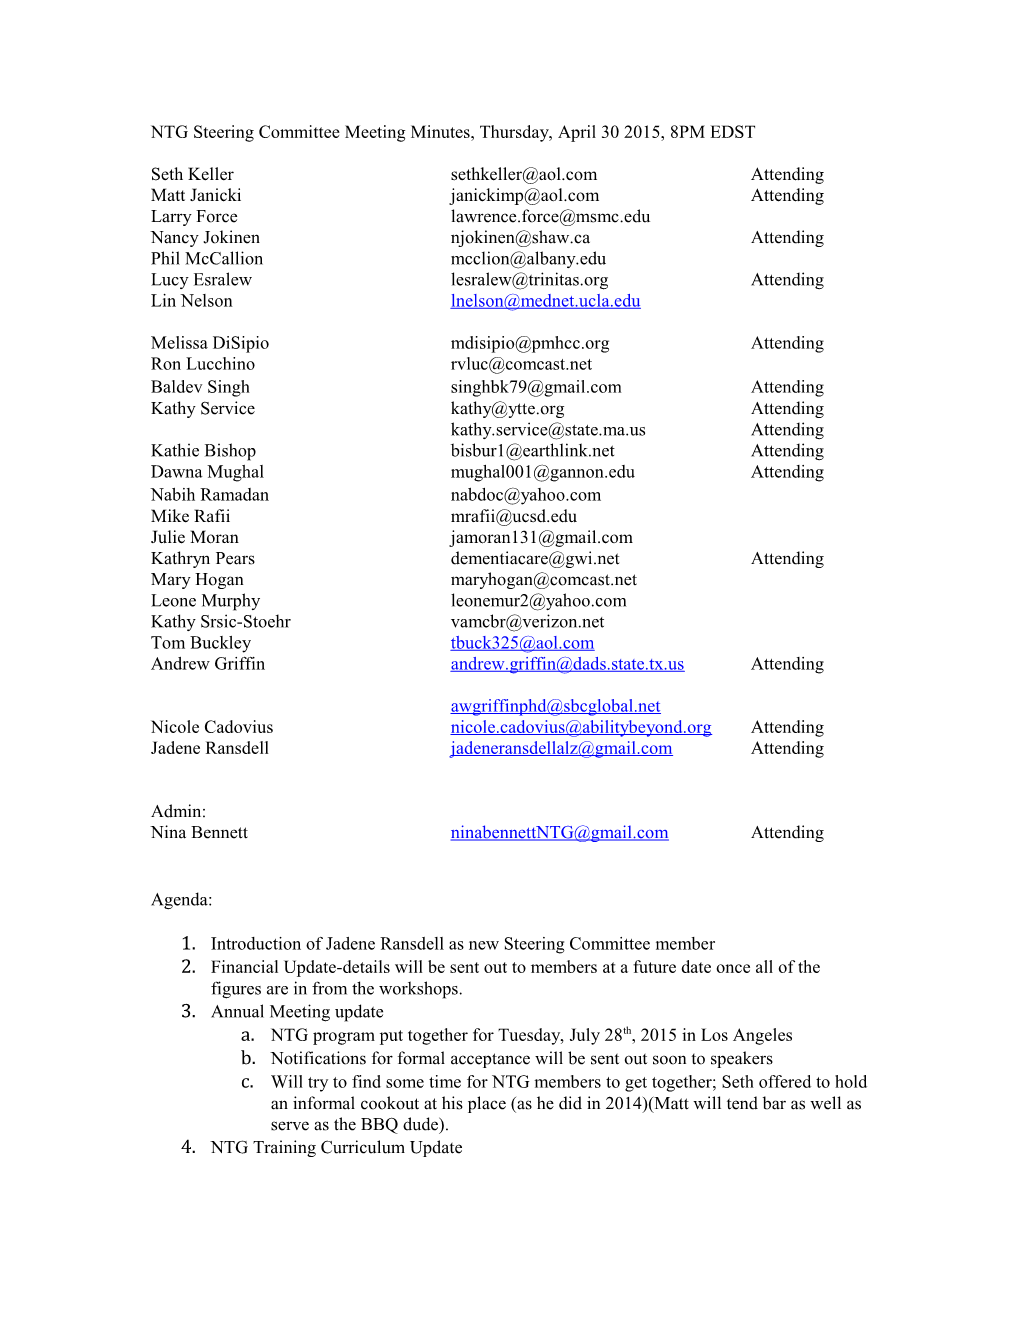 NTG Steering Committee Meeting Minutes, Thursday, April 30 2015, 8PM EDST